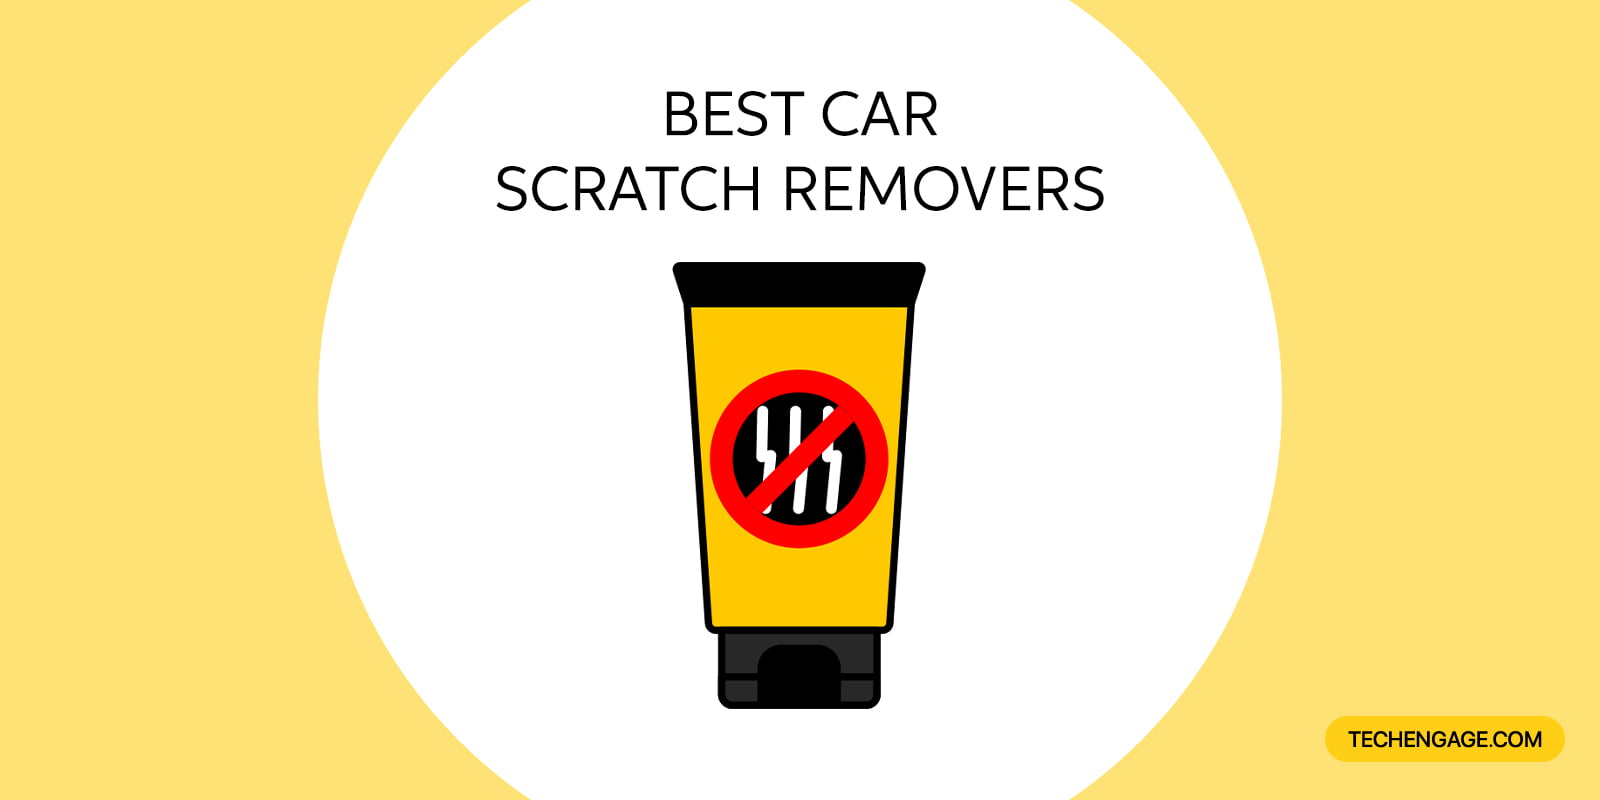 Best Car Scratch Remover on Amazon